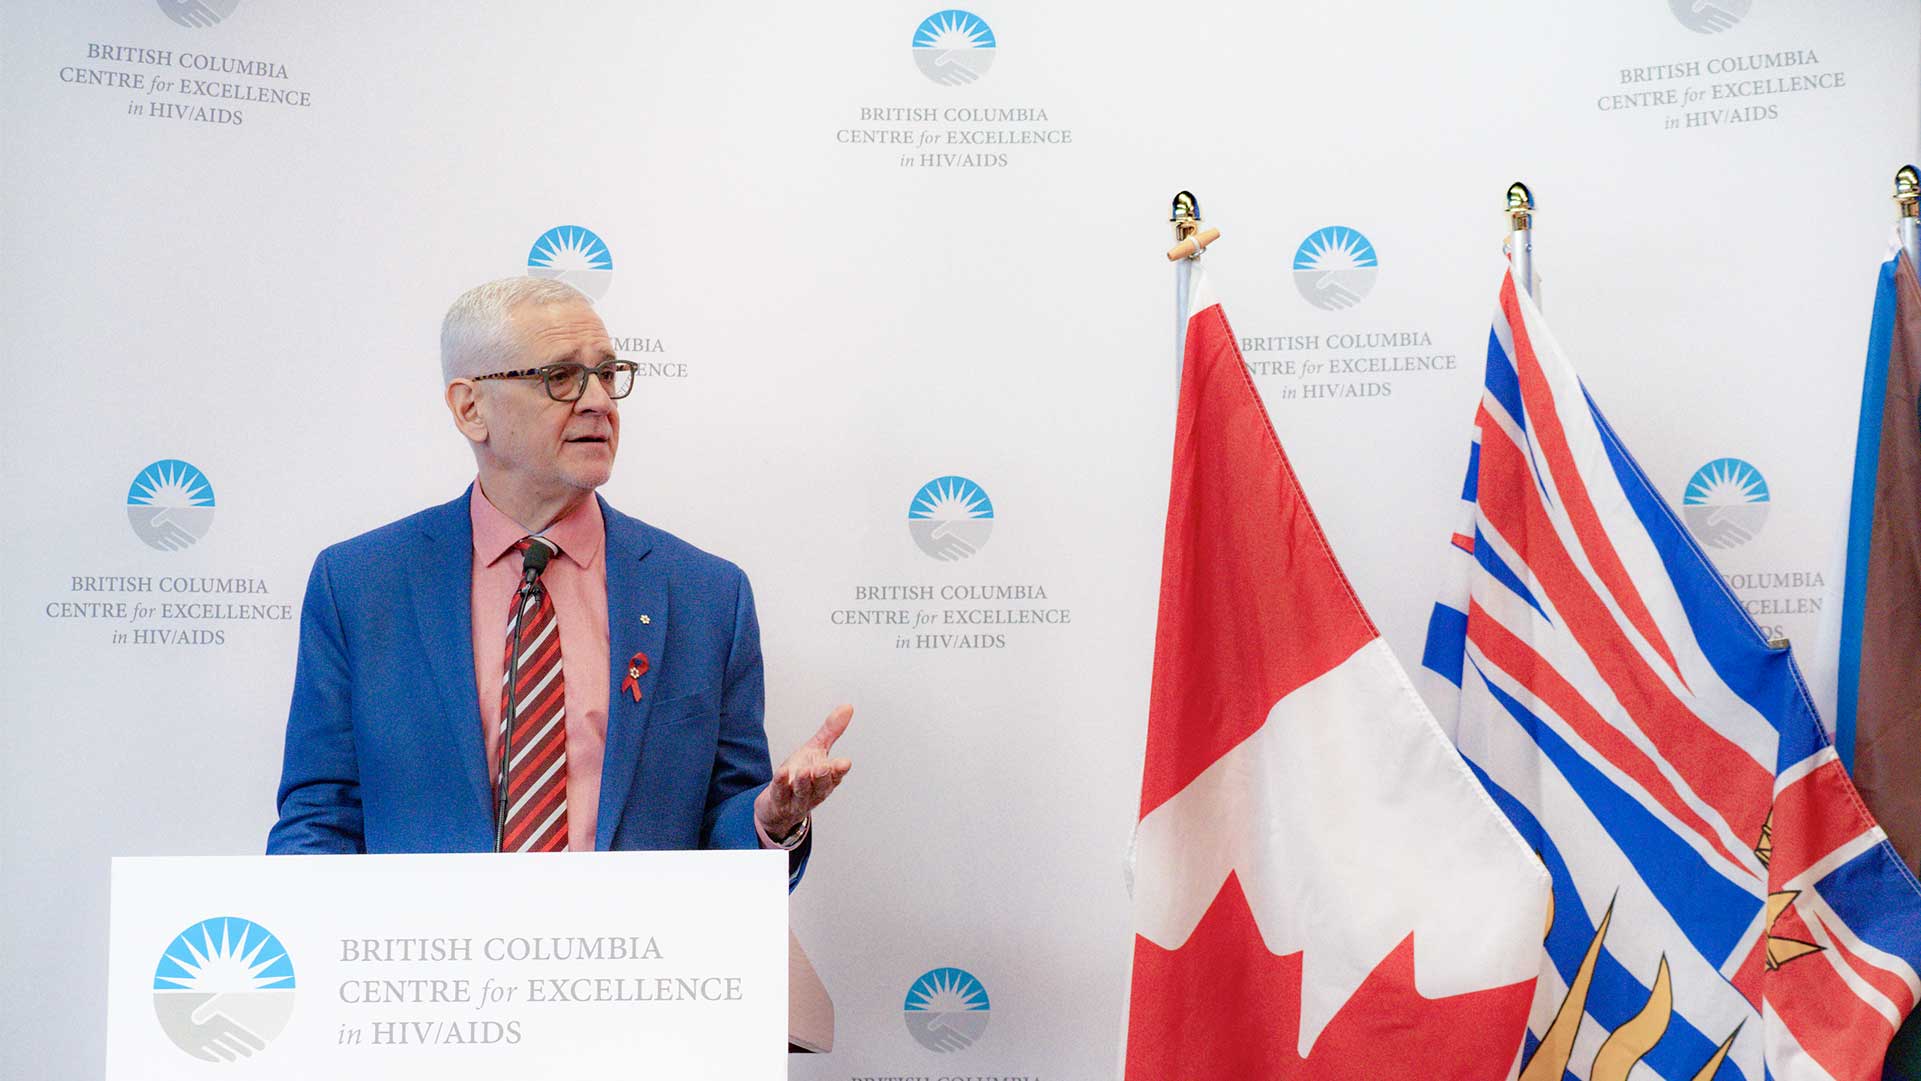 https://www.bccfe.ca/sites/default/files/revslider/image/BC-Centre-for-Excellence-in-HIV-AIDS-launches-new-initiative-targeting-sexually-transmitted-infections-in-BC.jpg